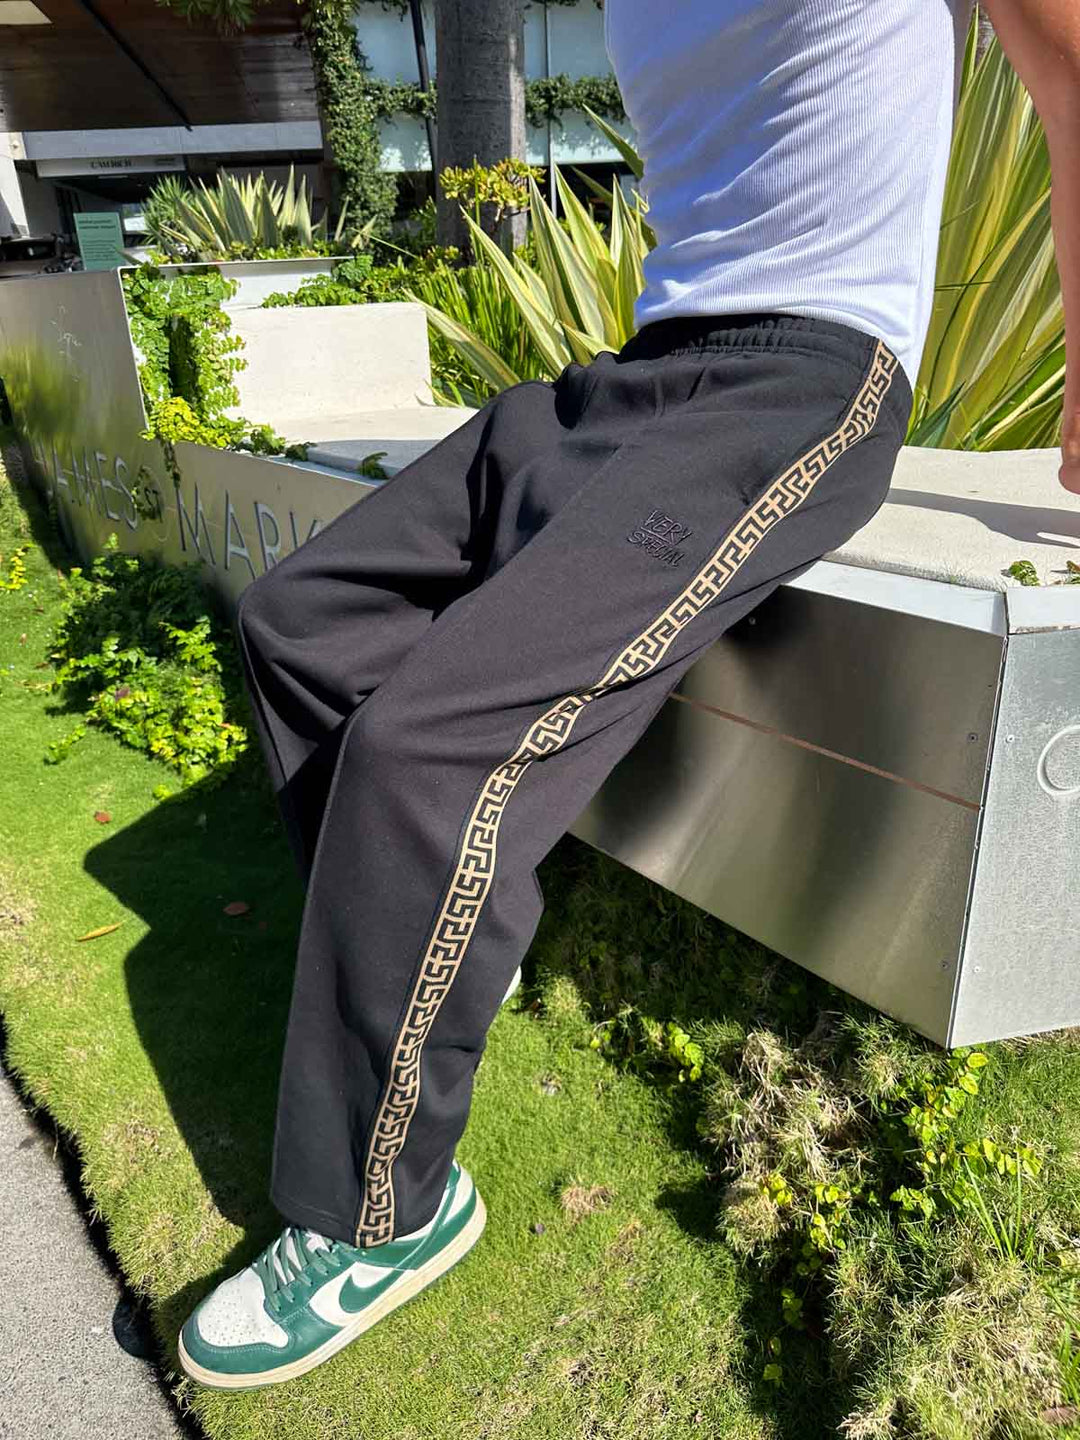 Something Very Special - Geo Track Pants 3.0 - Black Gold